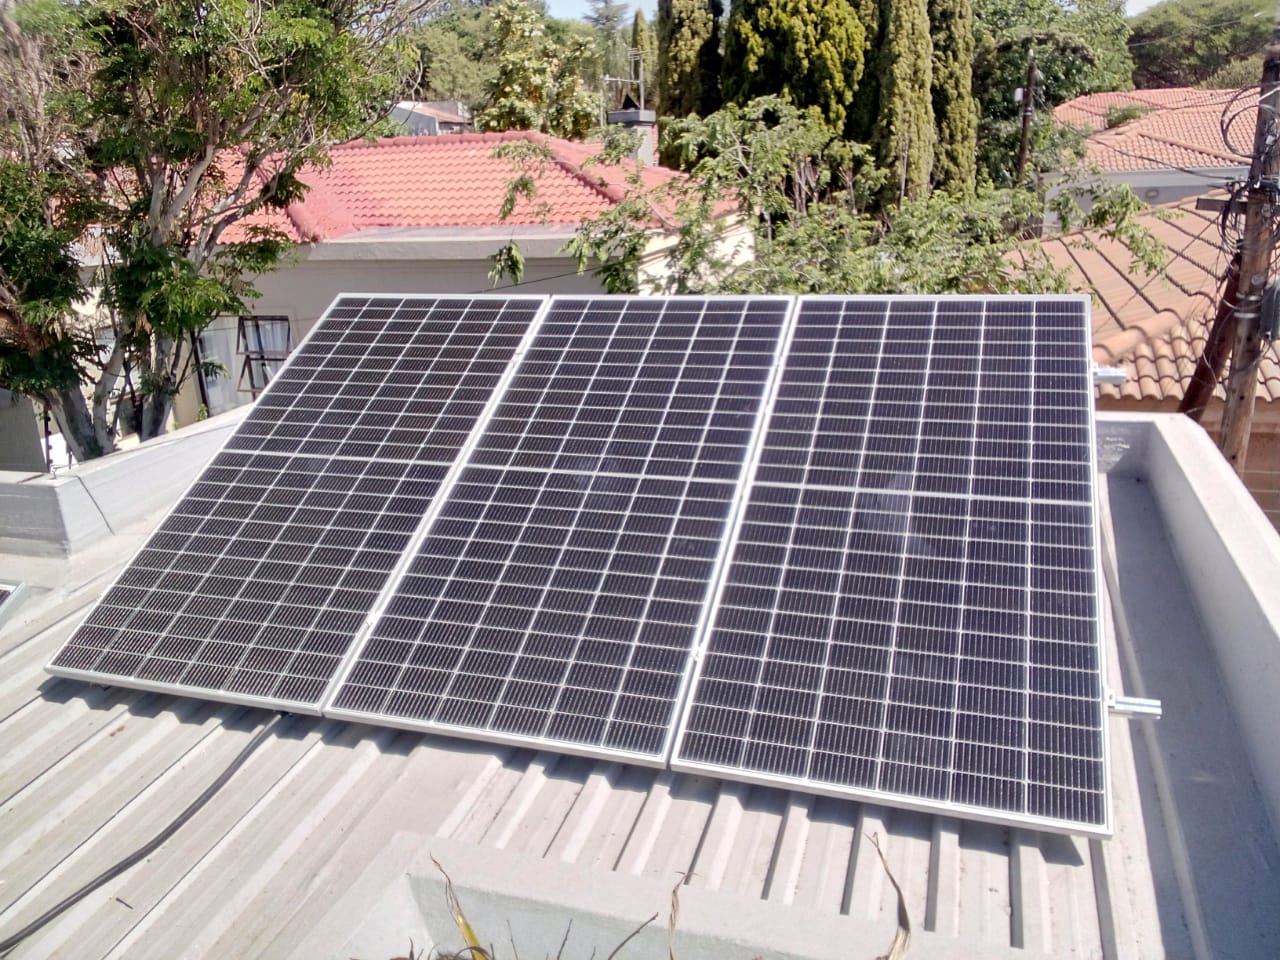 EL Solar Solutions conducting a thorough energy analysis to optimize energy consumption